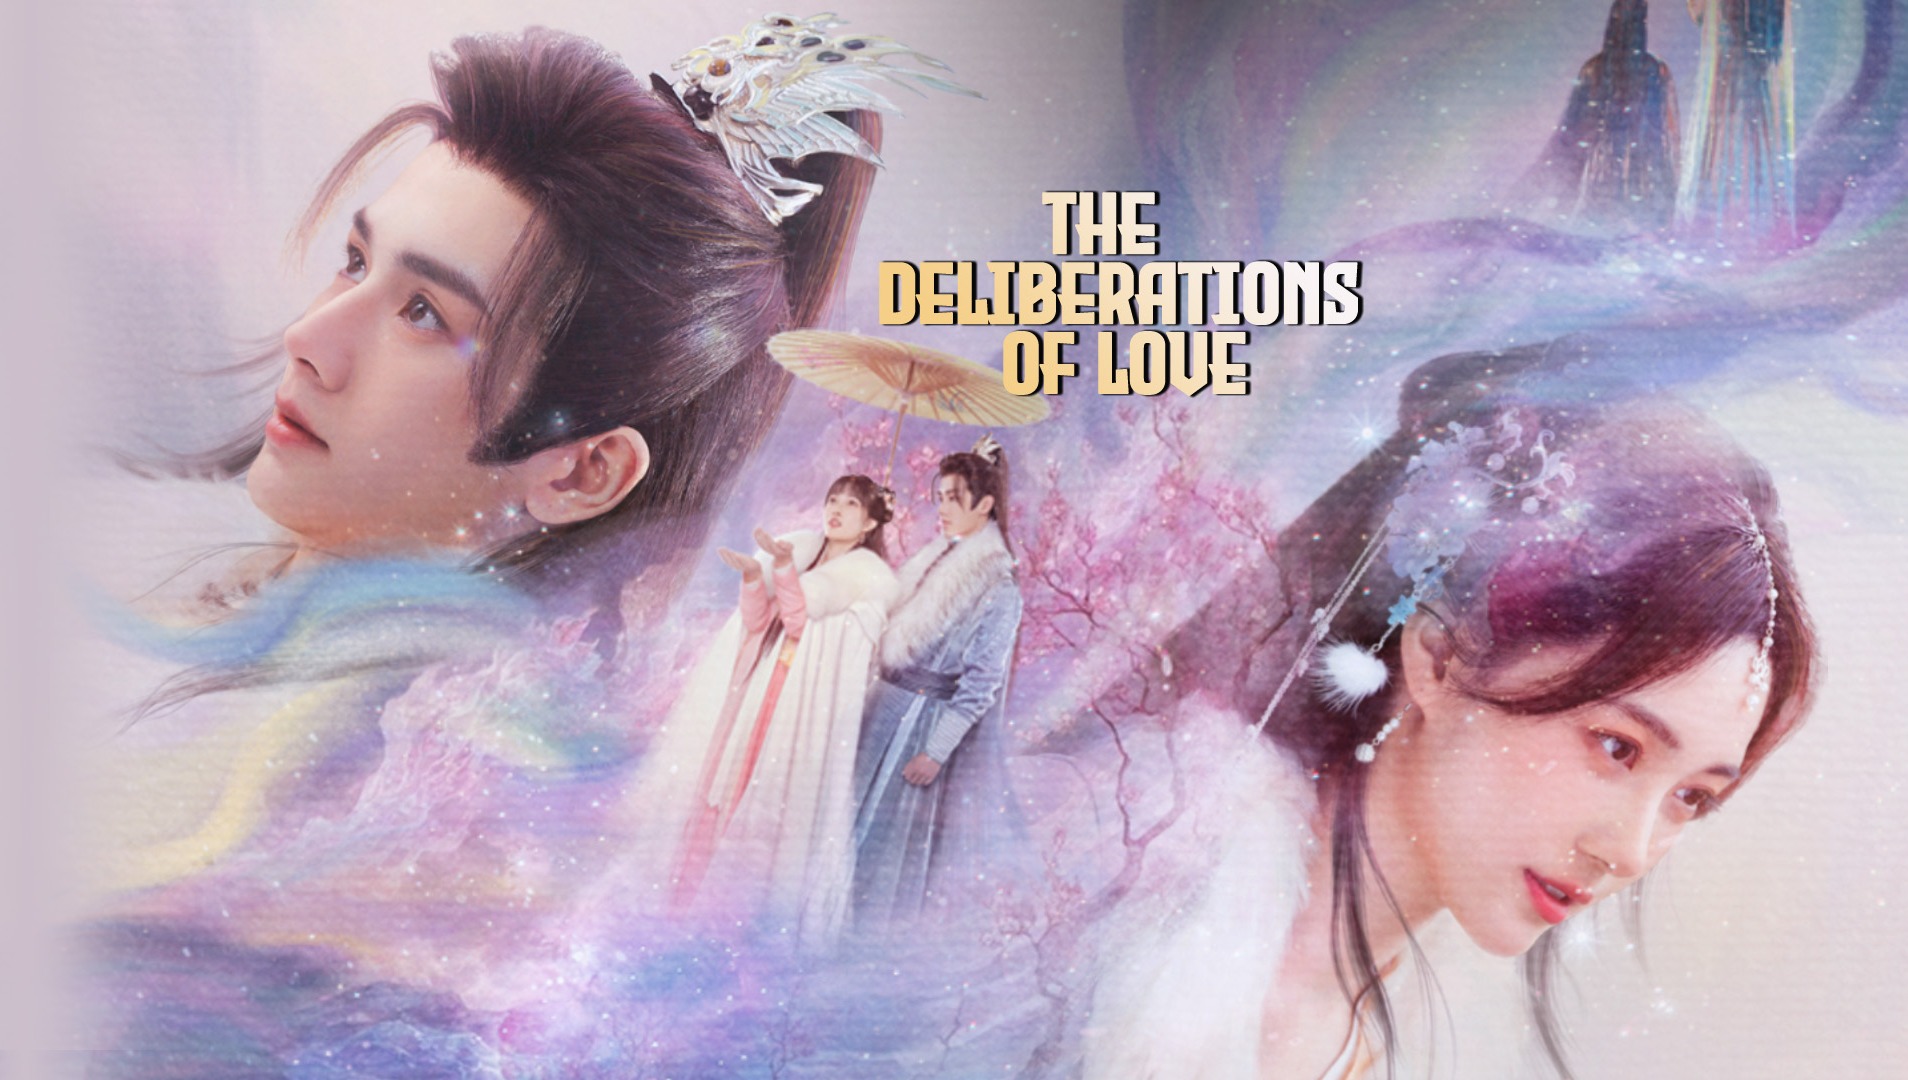 The Deliberations of Love